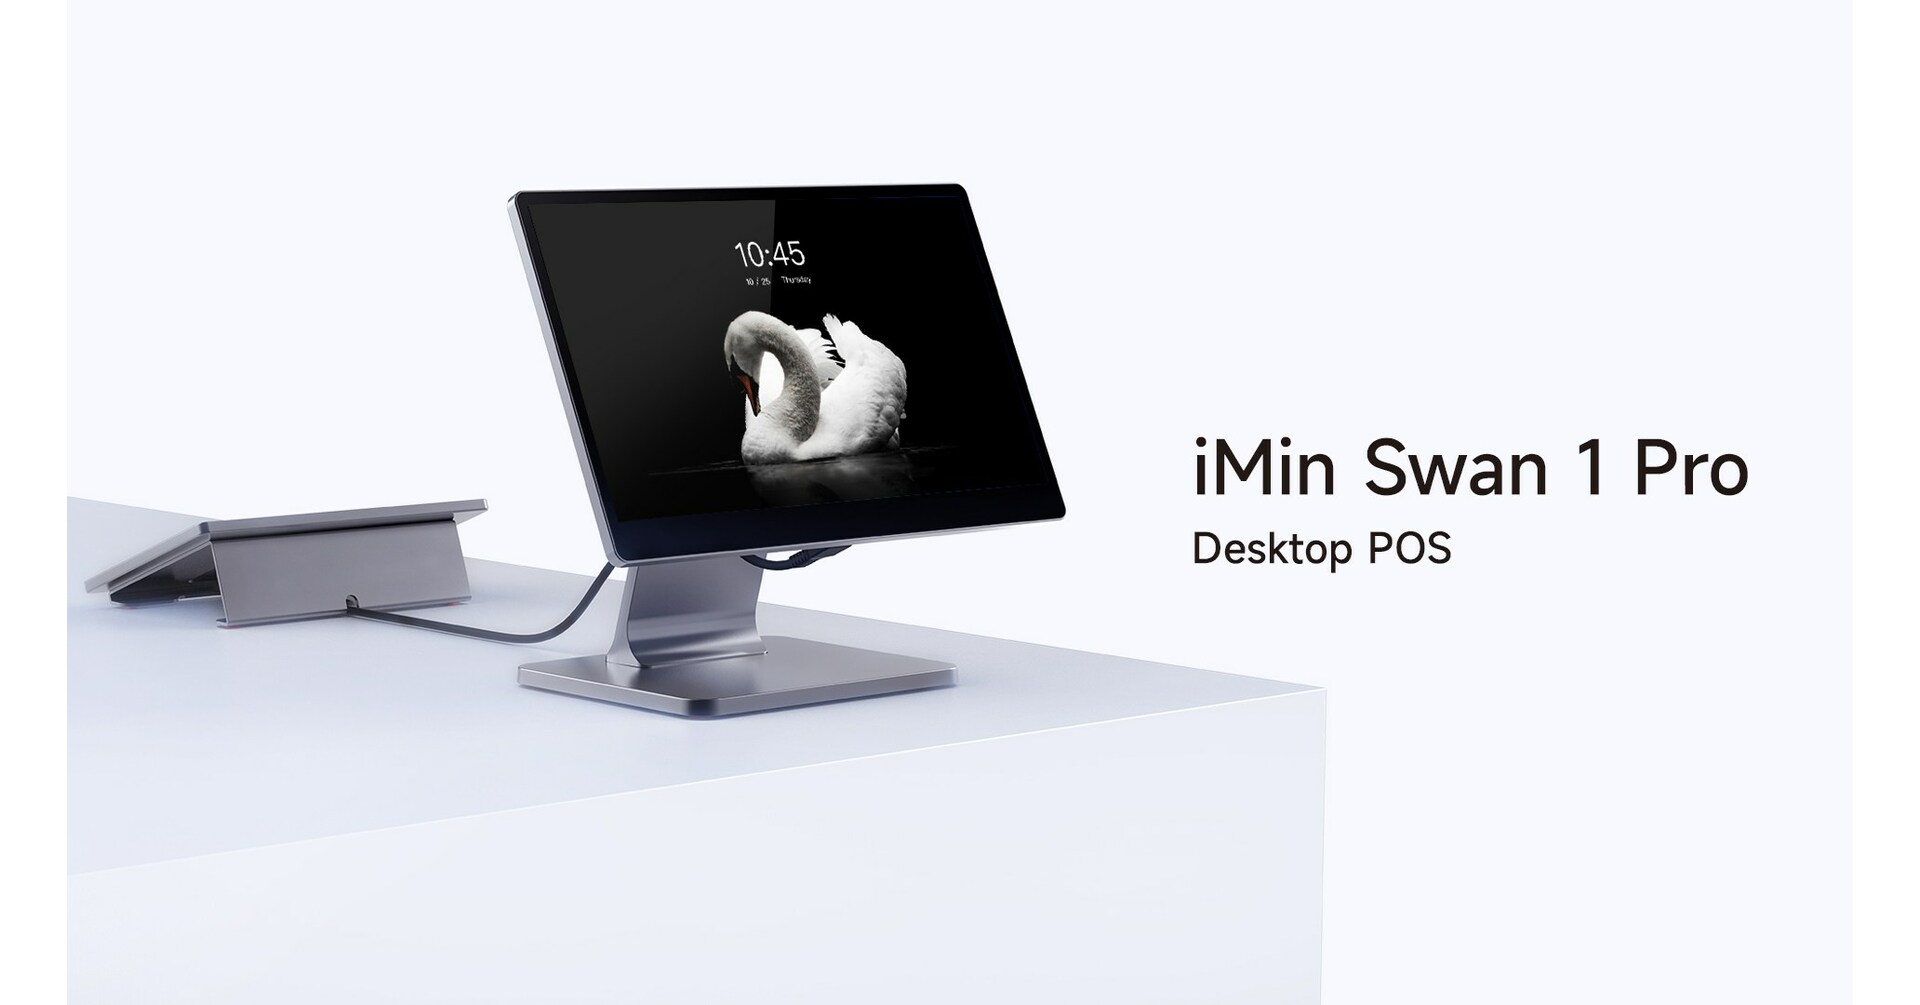 Singapore’s iMin Technology raises US$5m to accelerate its global expansion in offering Android-based smart commercial devices.